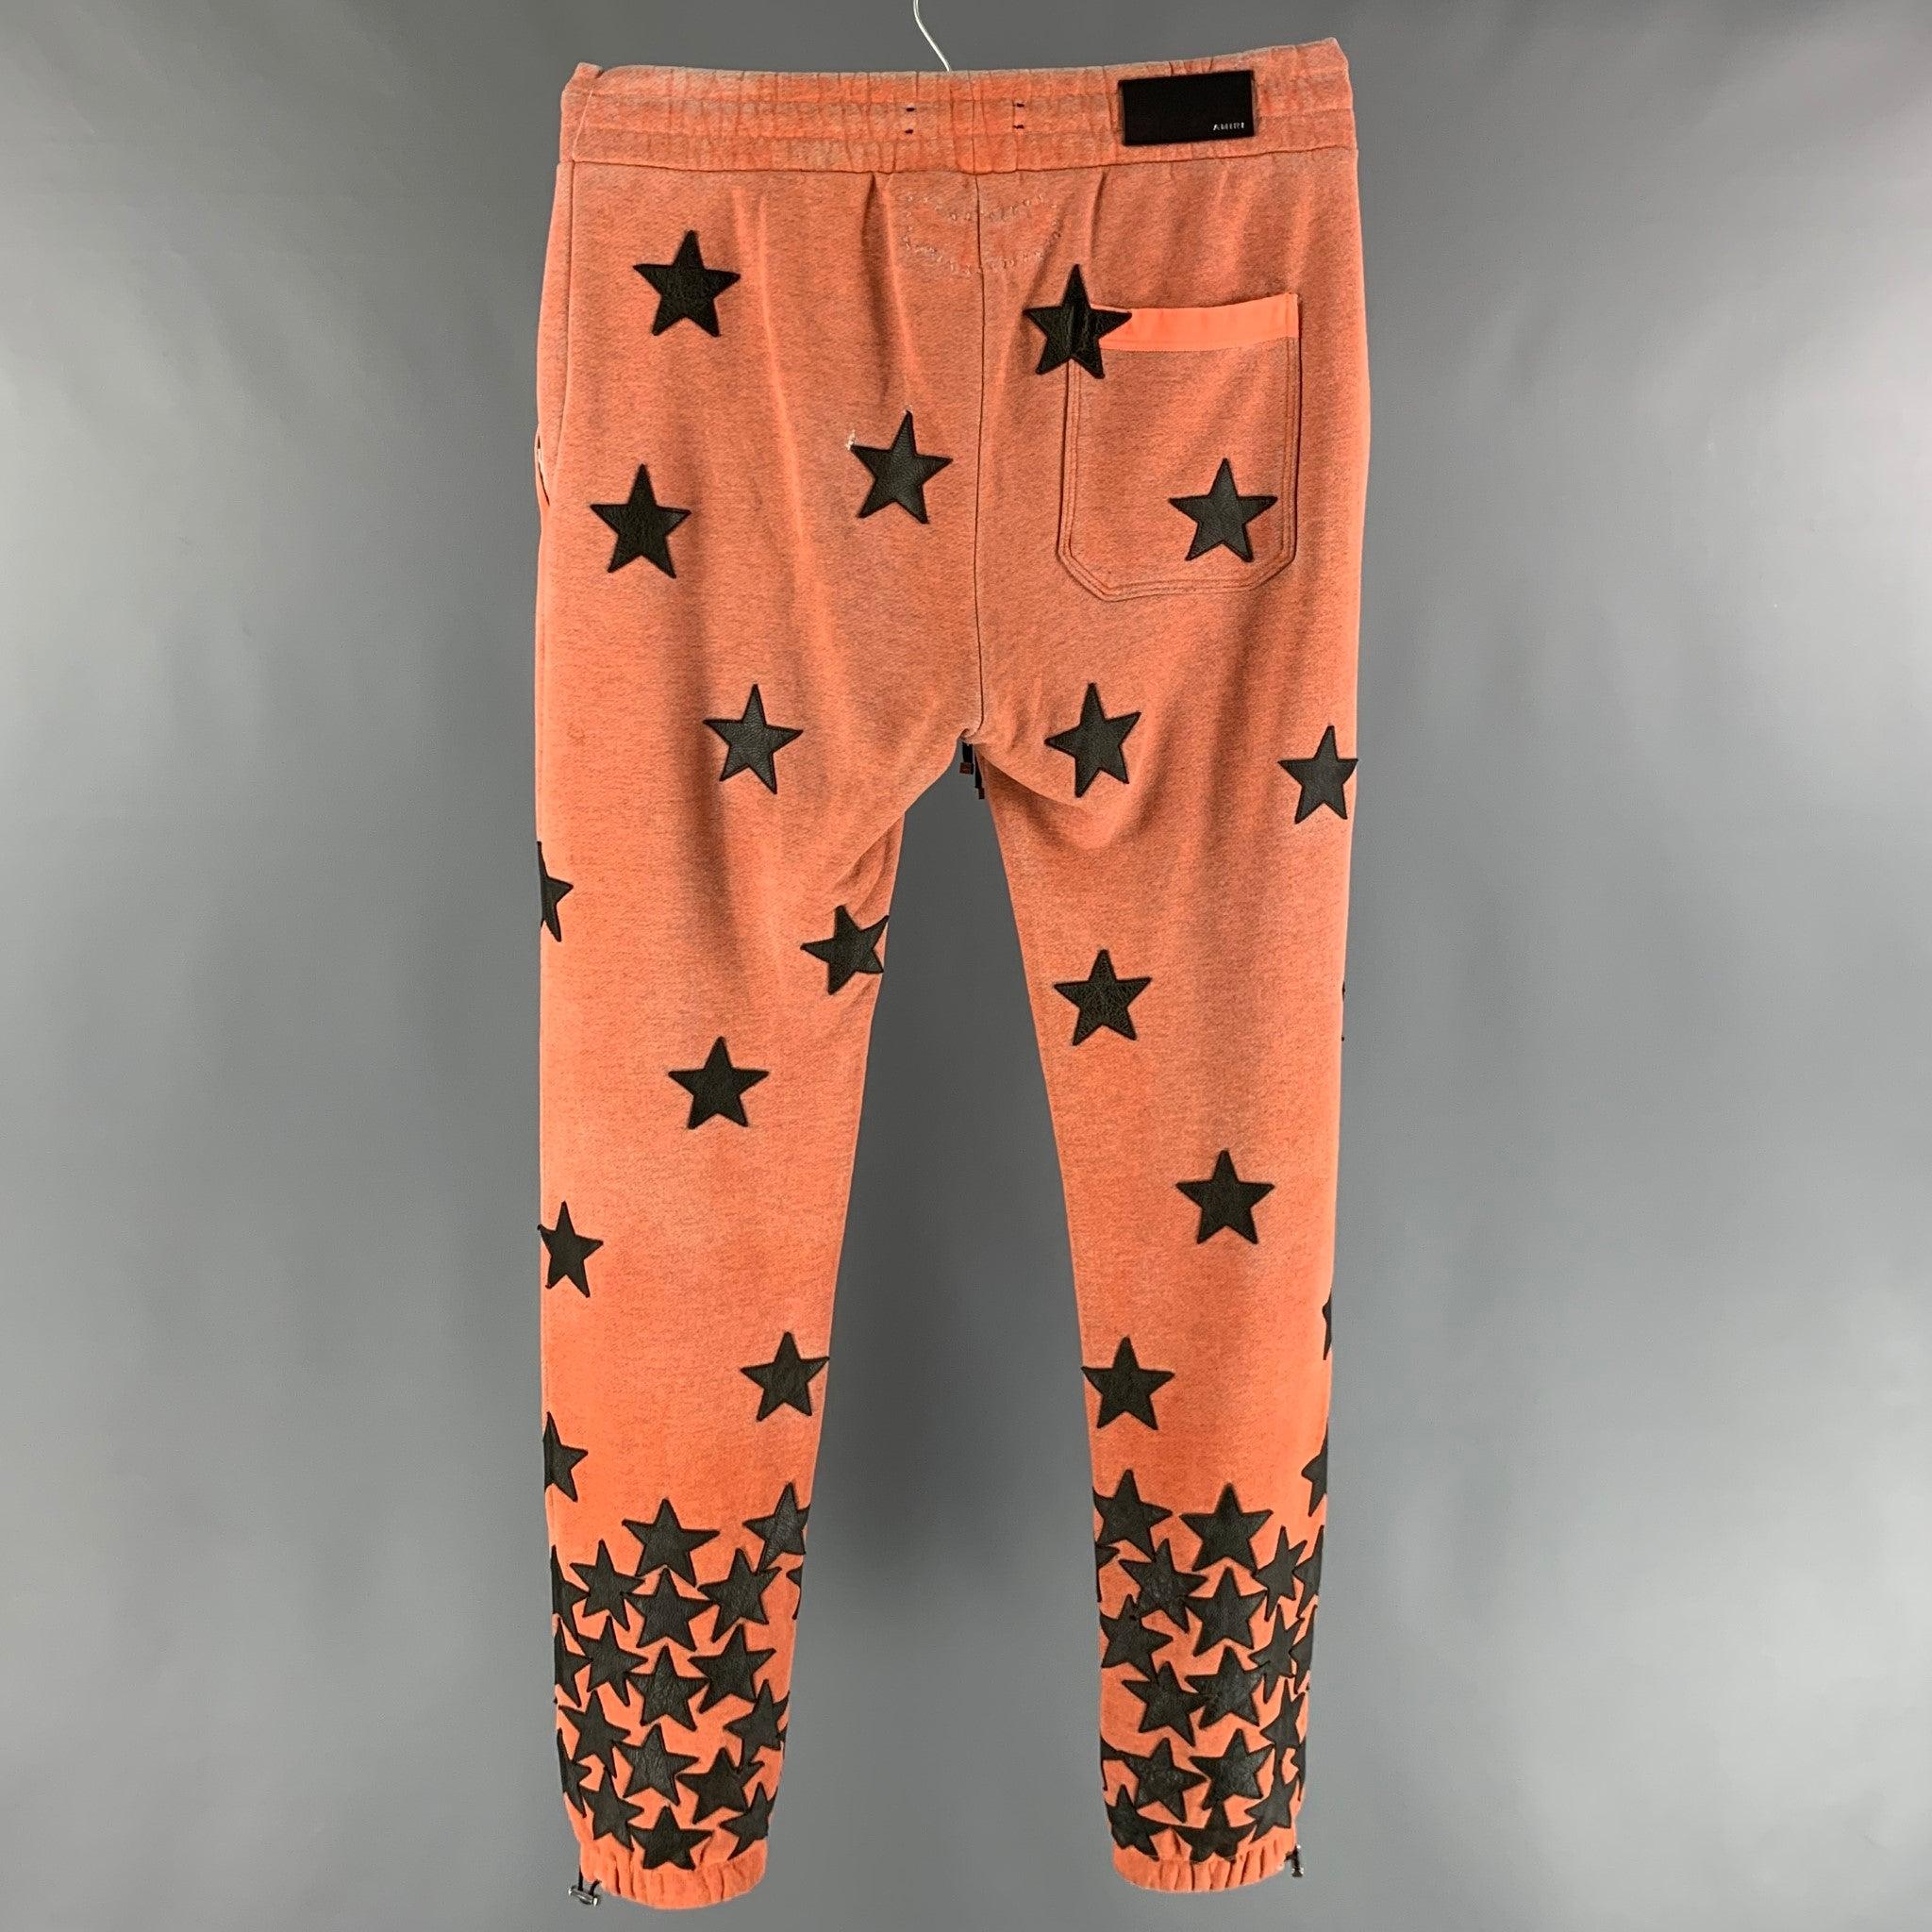 AMIRI sweatpants comes in an orange distress looking
 cotton french terry featuring leather black stars applique, zipper pockets, drawstring, cuffed legs, and an elastic waistband. Very Good Pre-Owned Condition. Minor pull around stars. As-Is.